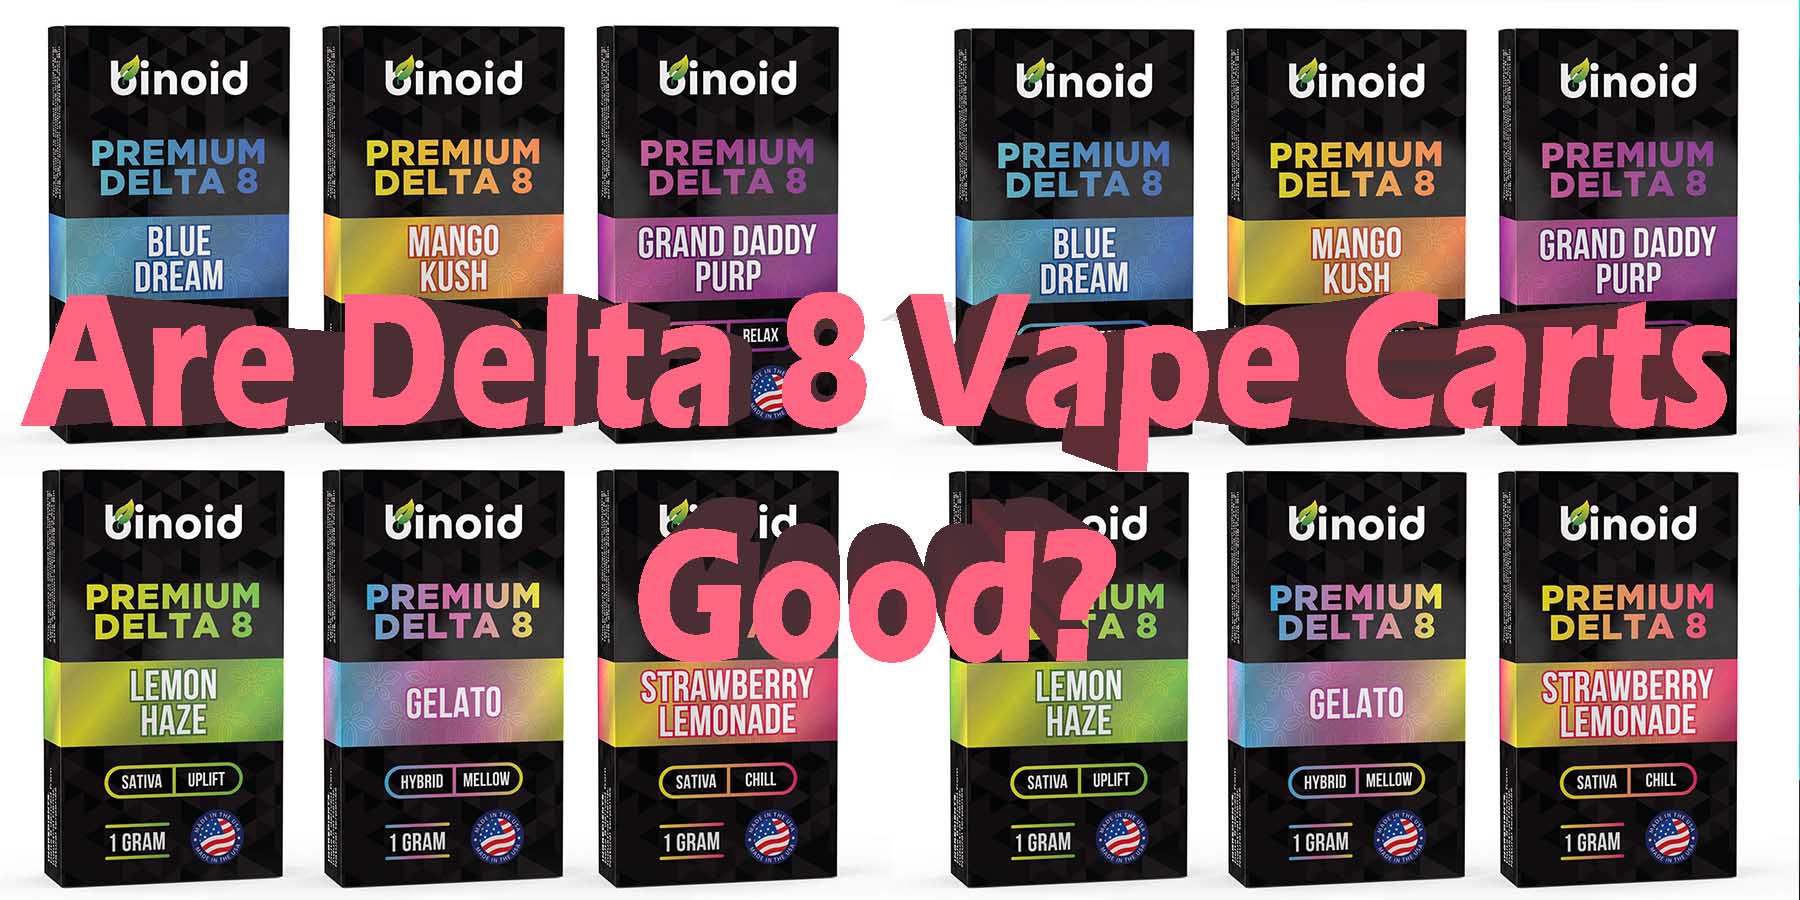 Are Delta 8 Vape Carts Good WhereToGet HowToBuy BestPrice GetNearMe Lowest Coupon DiscountStore ShopOnline Quality Legal Binoid For Sale Review ShopBinoid